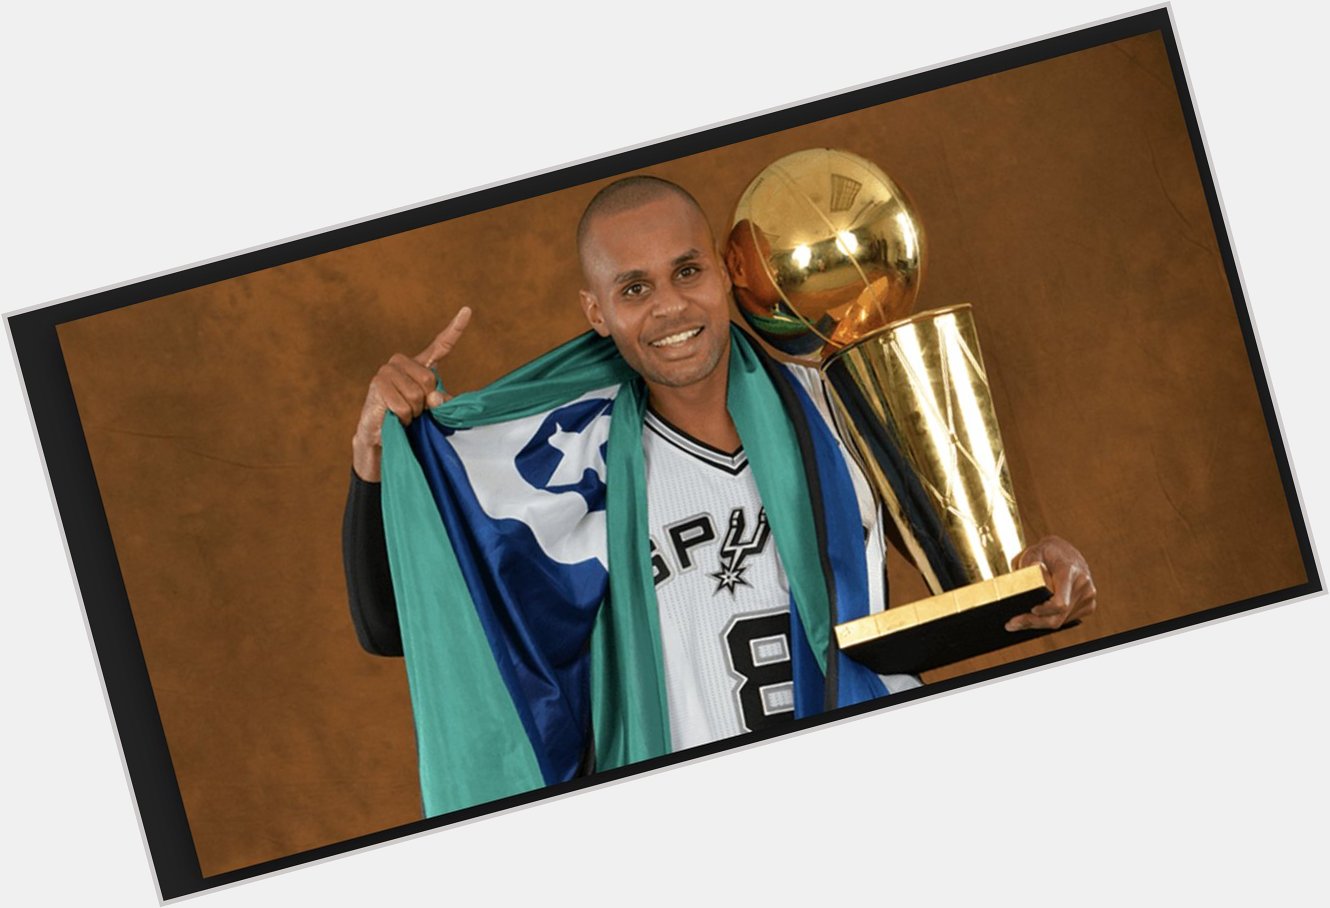 29 years old today. Spurs PG who also LIGHTS IT UP whenever he plays for Australia. Happy birthday to 